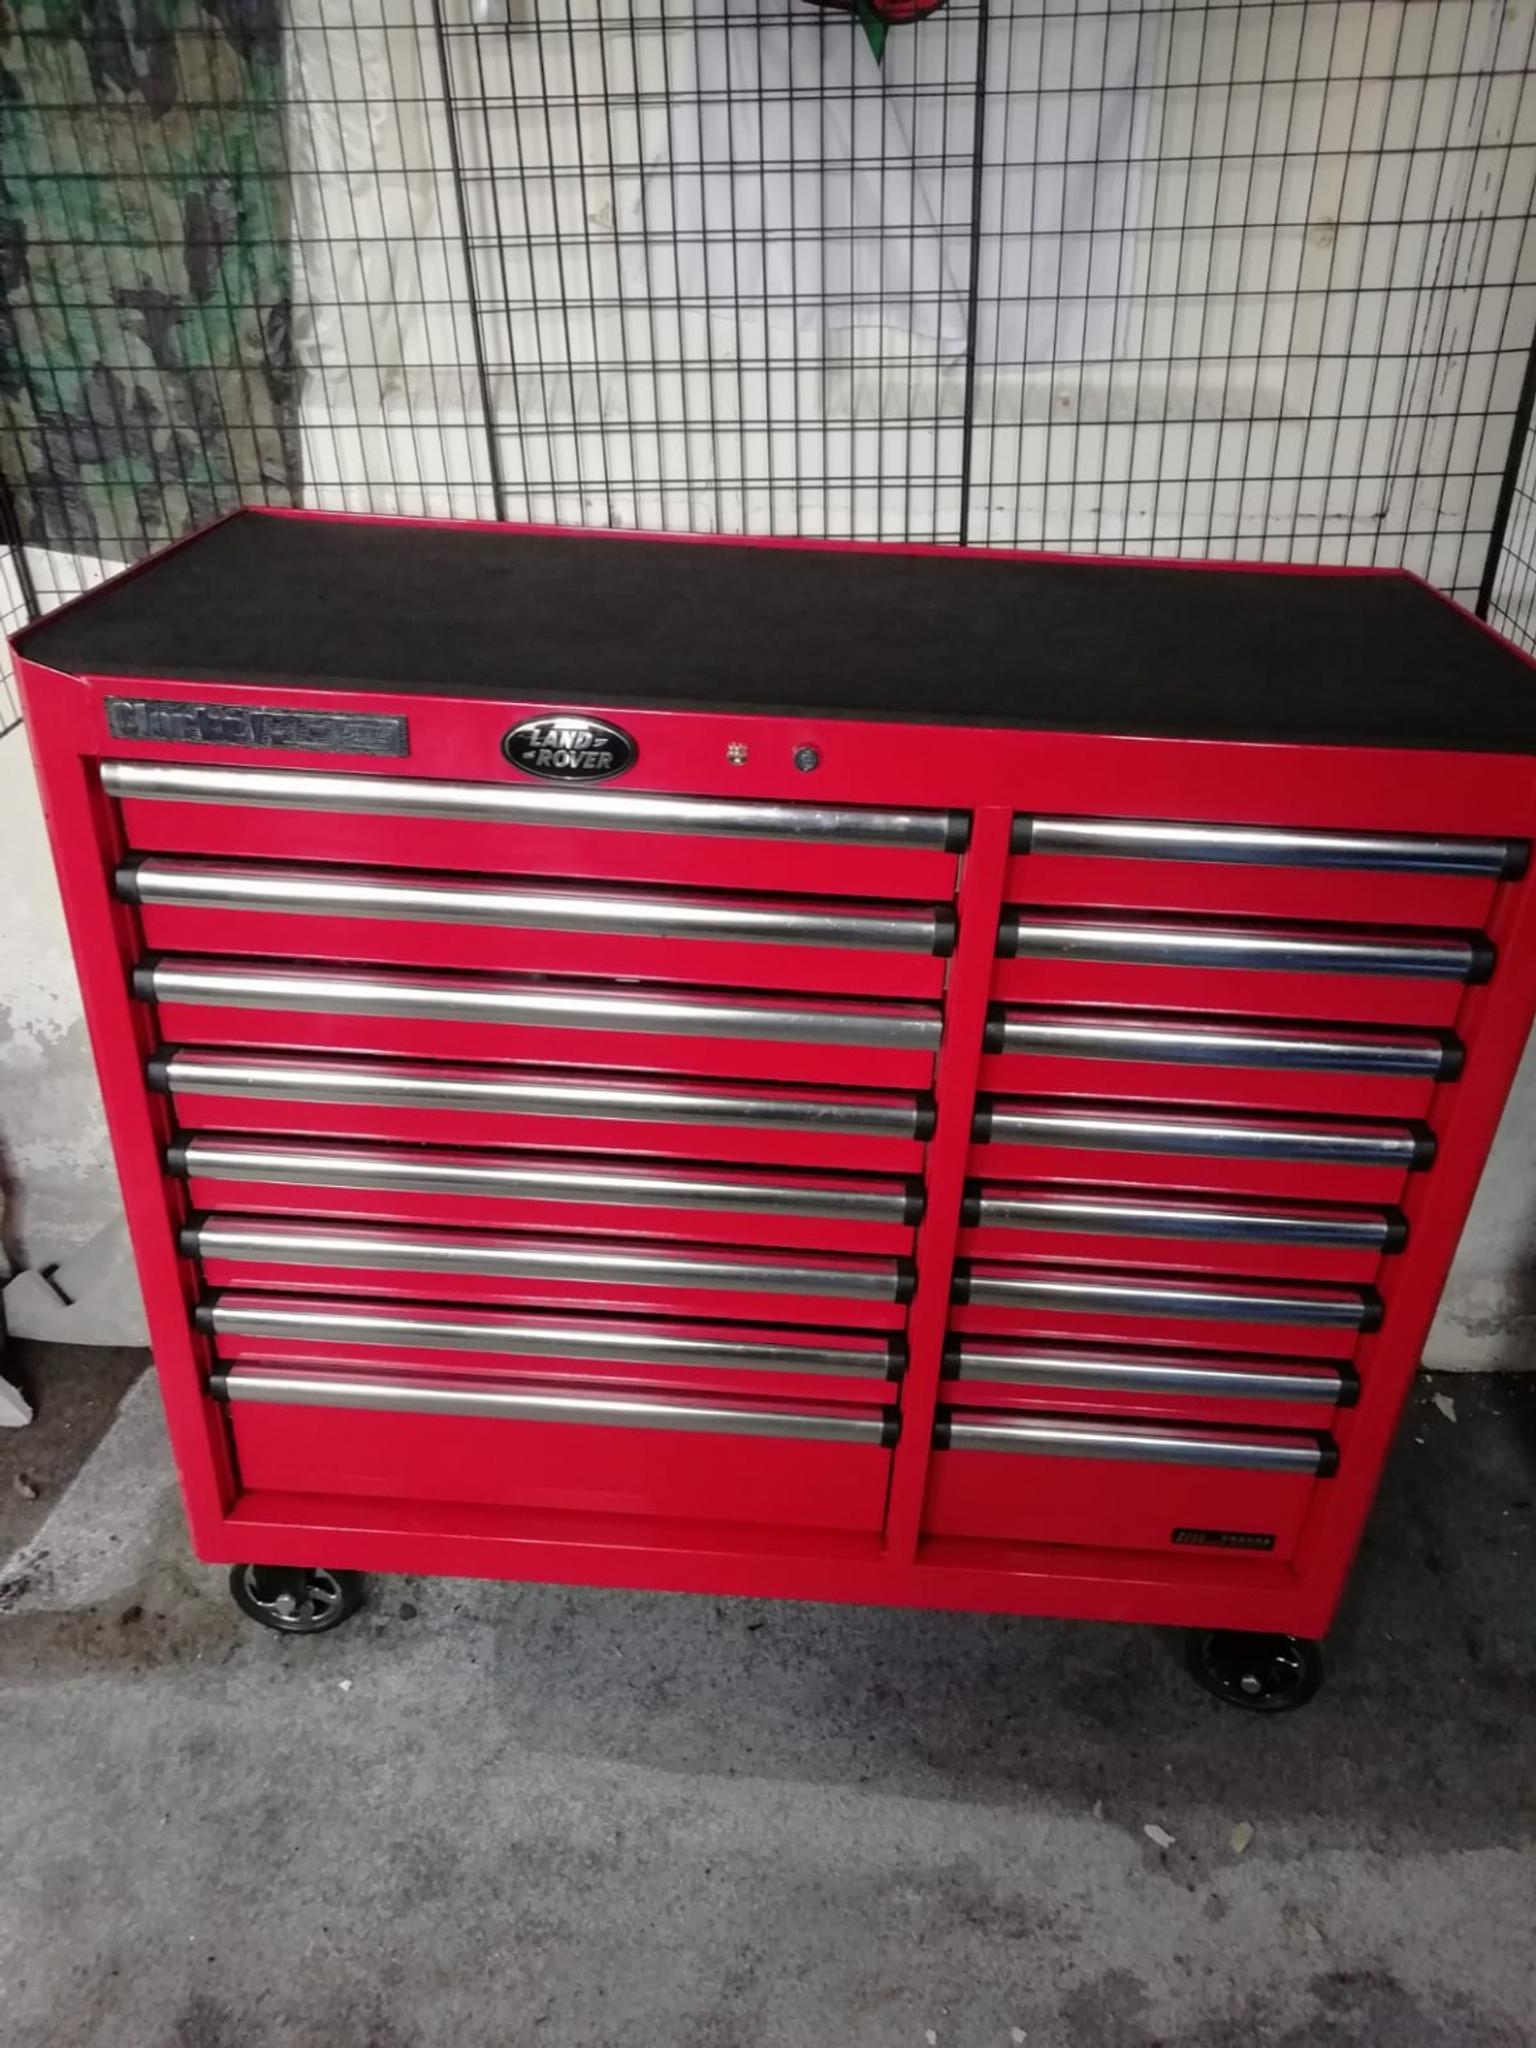 Clarke Hd Plus 16 Drawer Tool Cabinet In M25 Salford For 350 00 For Sale Shpock